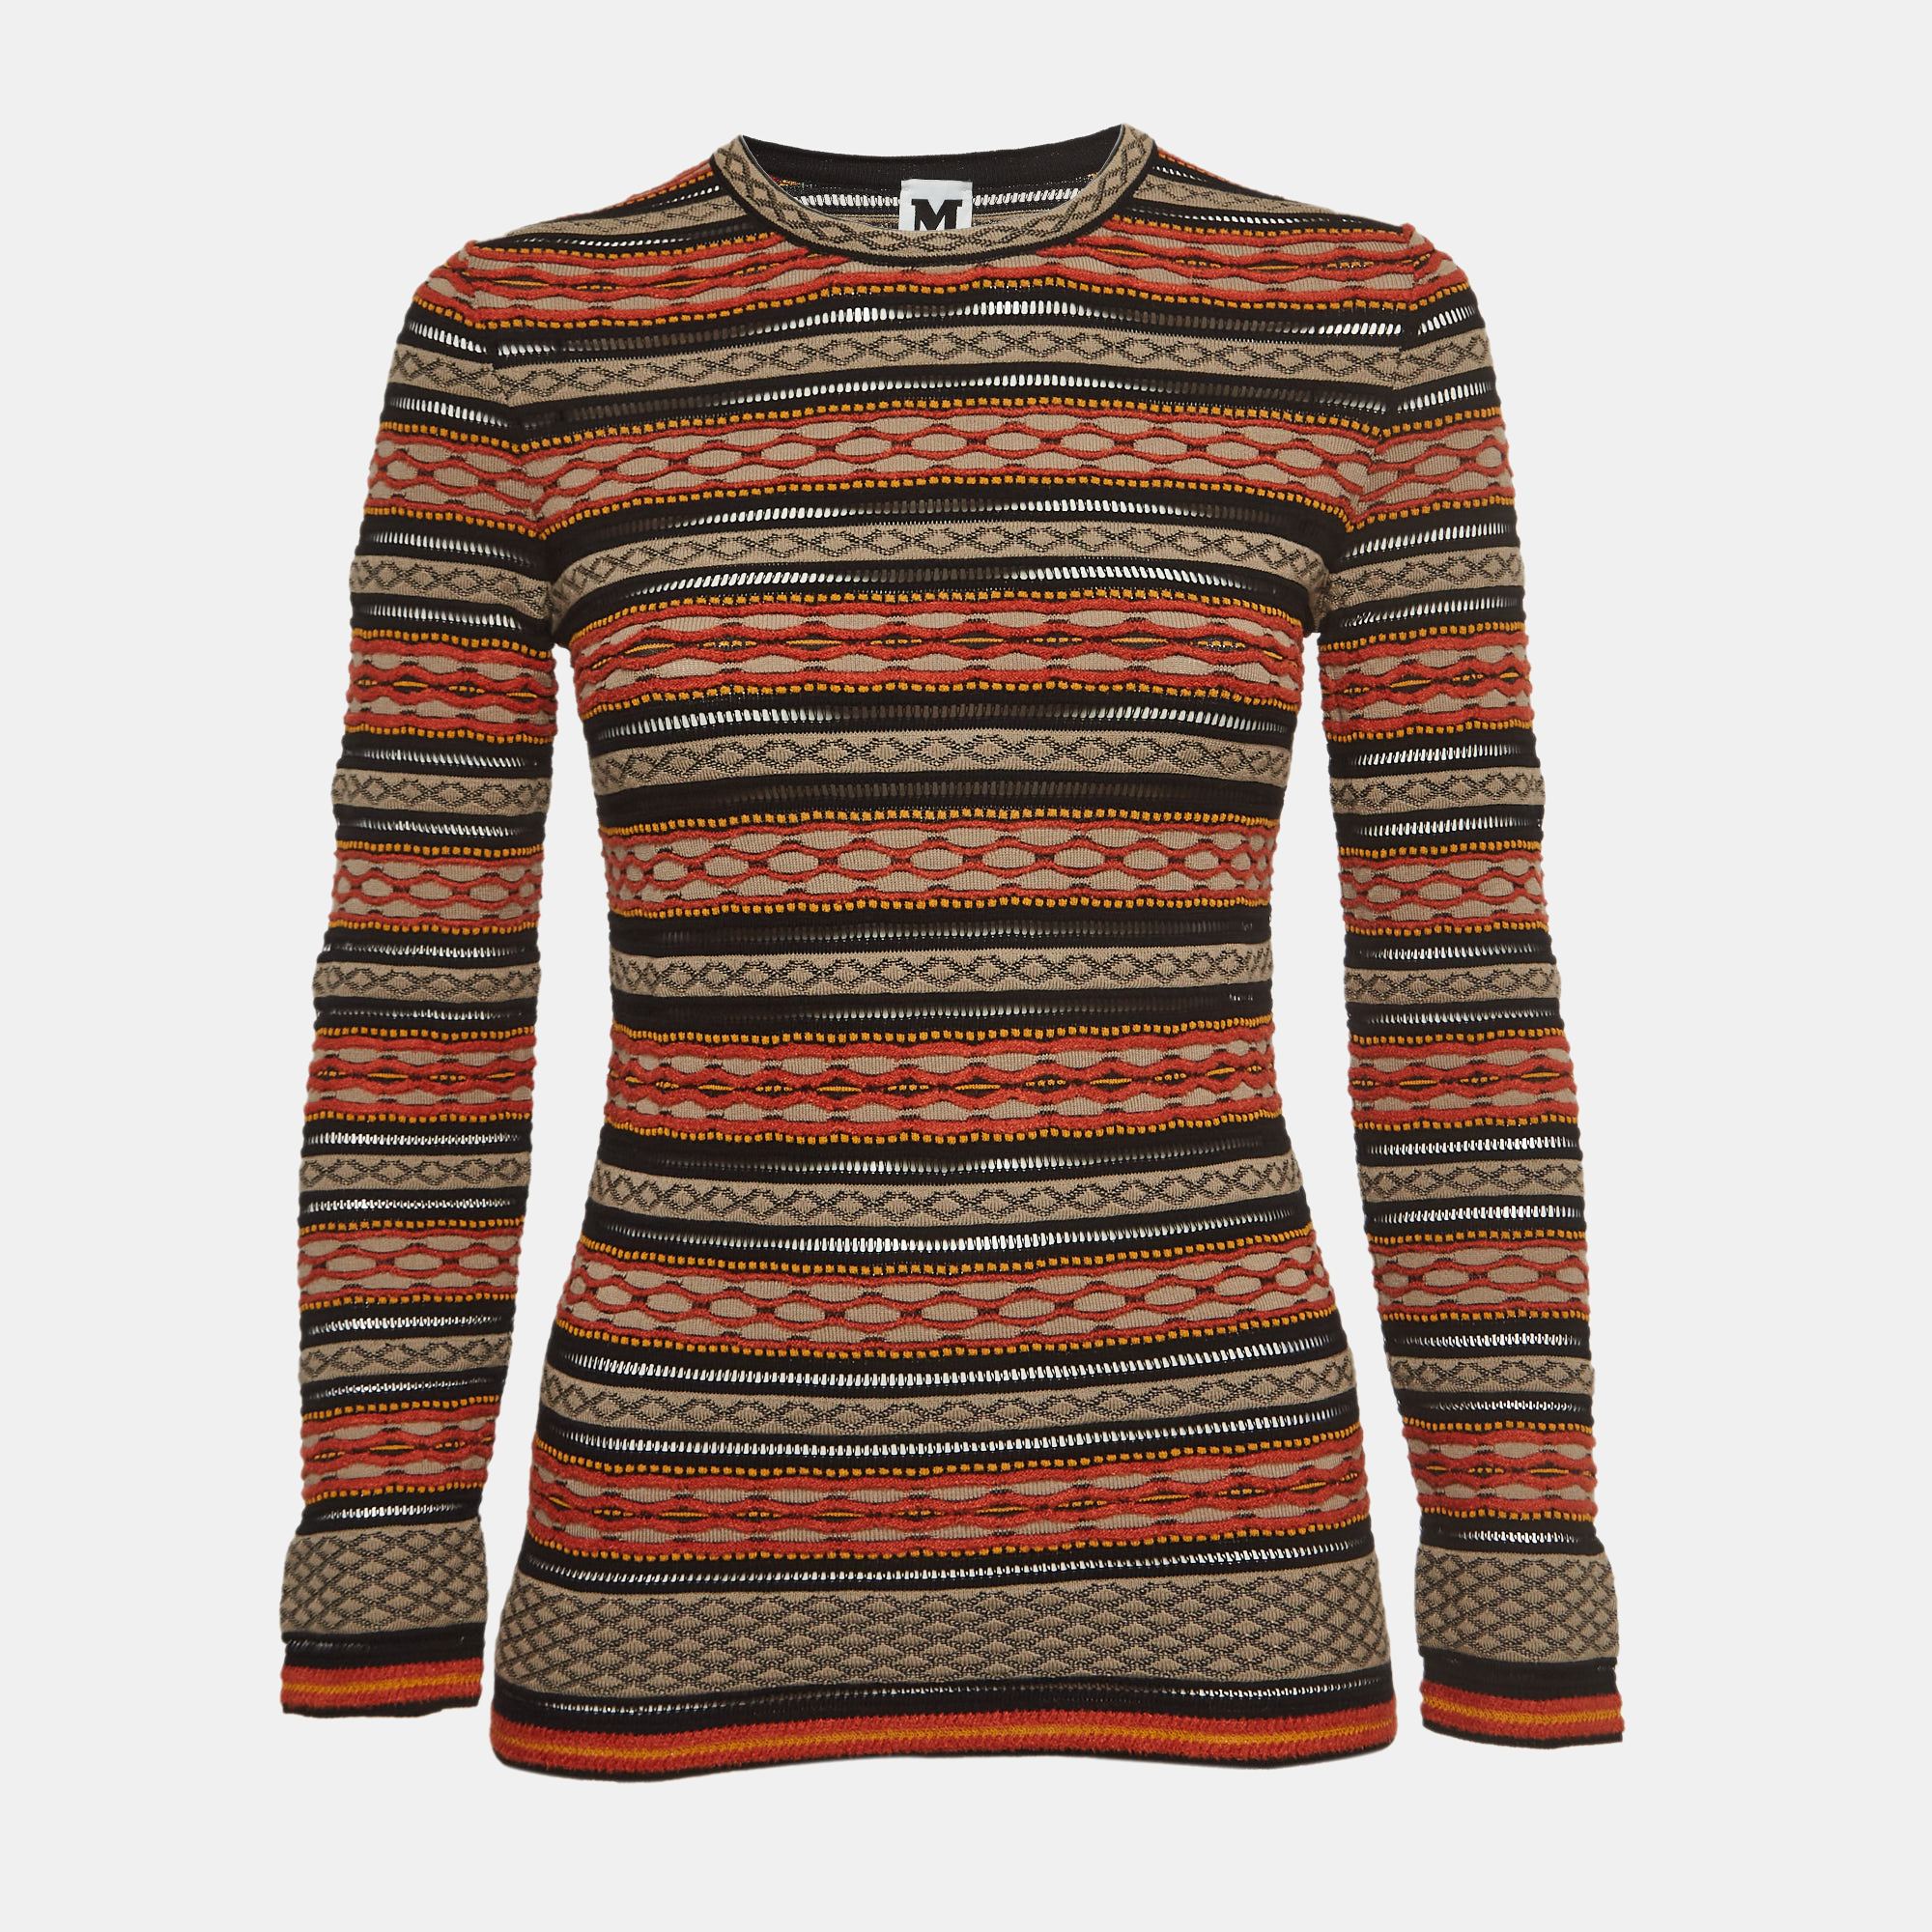 Pre-owned M Missoni Multicolor Patterned Knit Top M